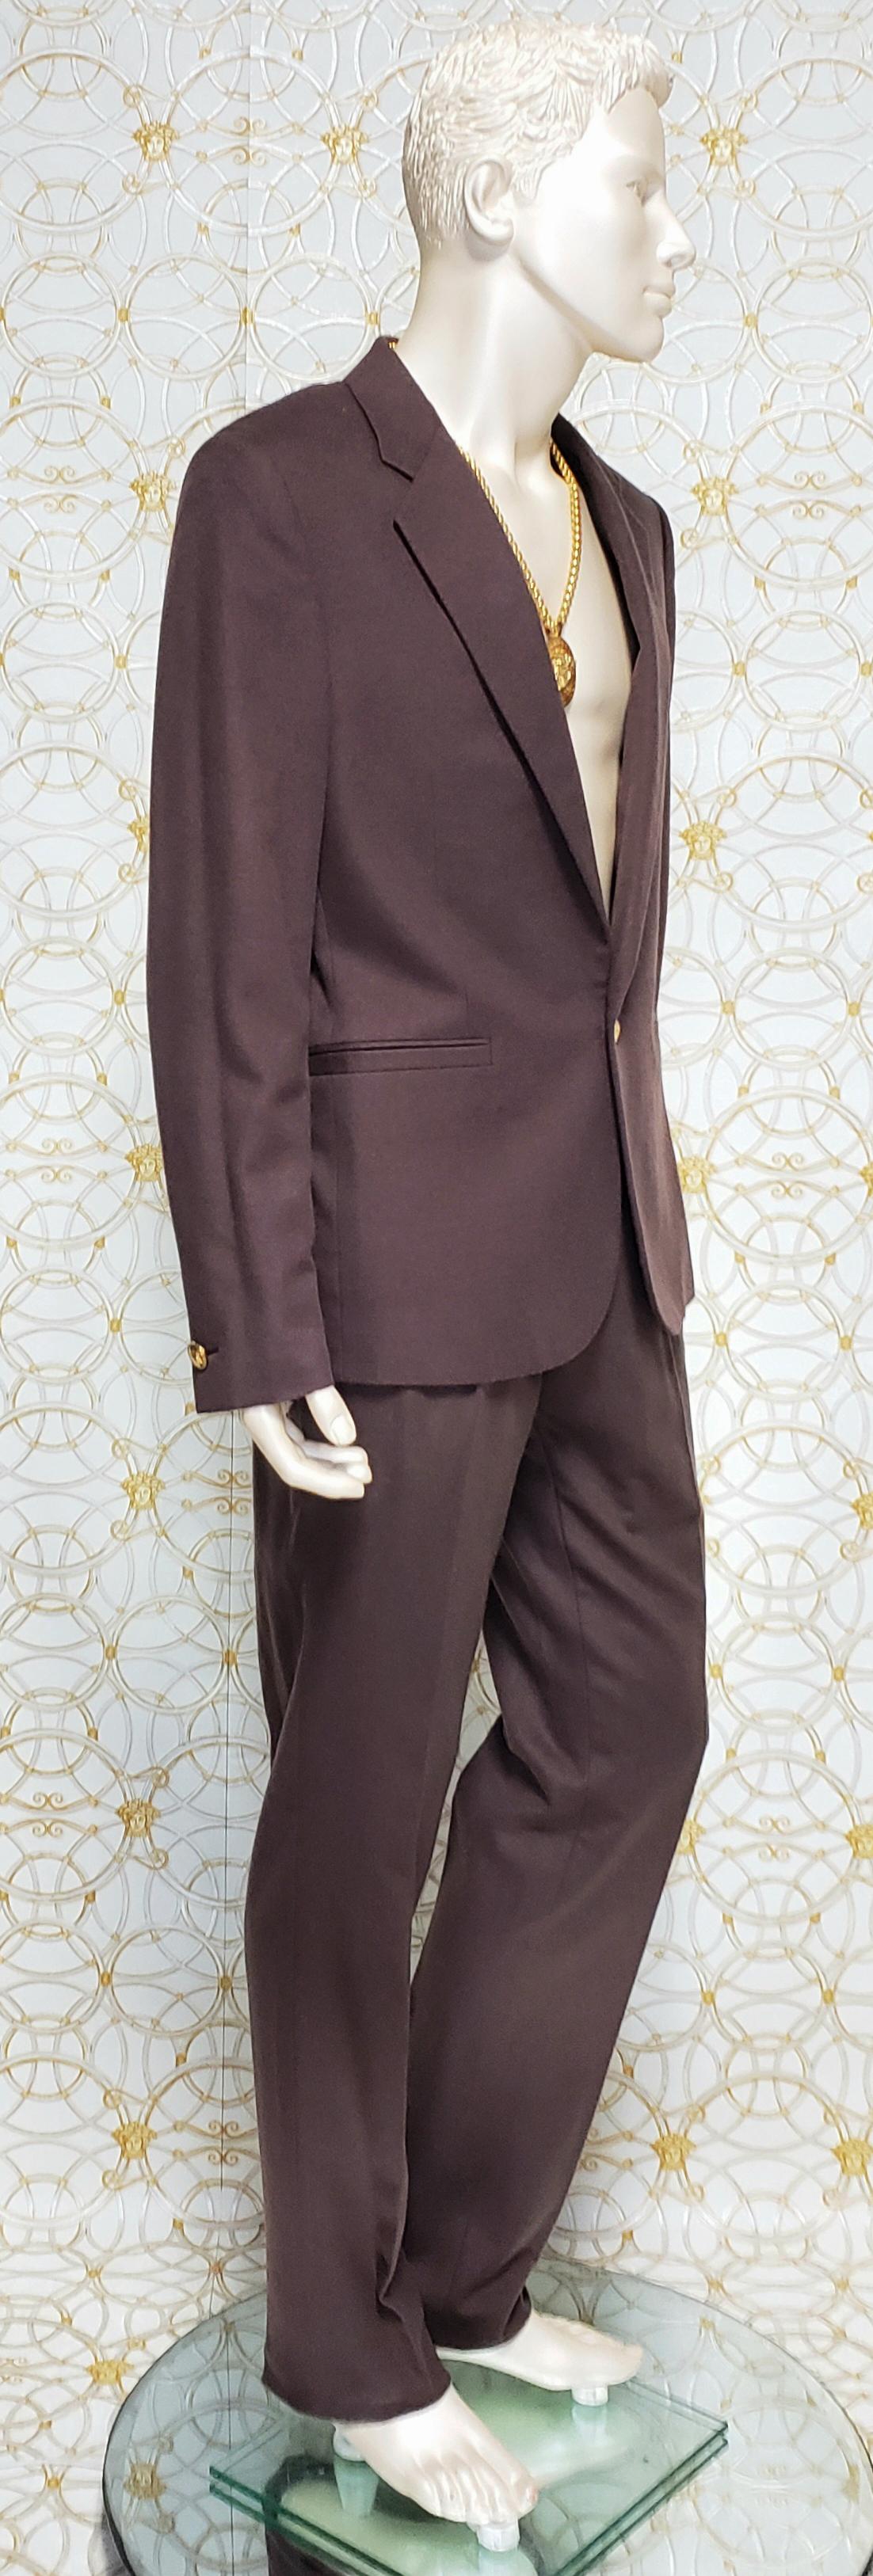 Men's F/W 2015 look # 3 BRAND NEW VERSACE BROWN CASHMERE and SILK SUIT 50 - 40 (L) For Sale